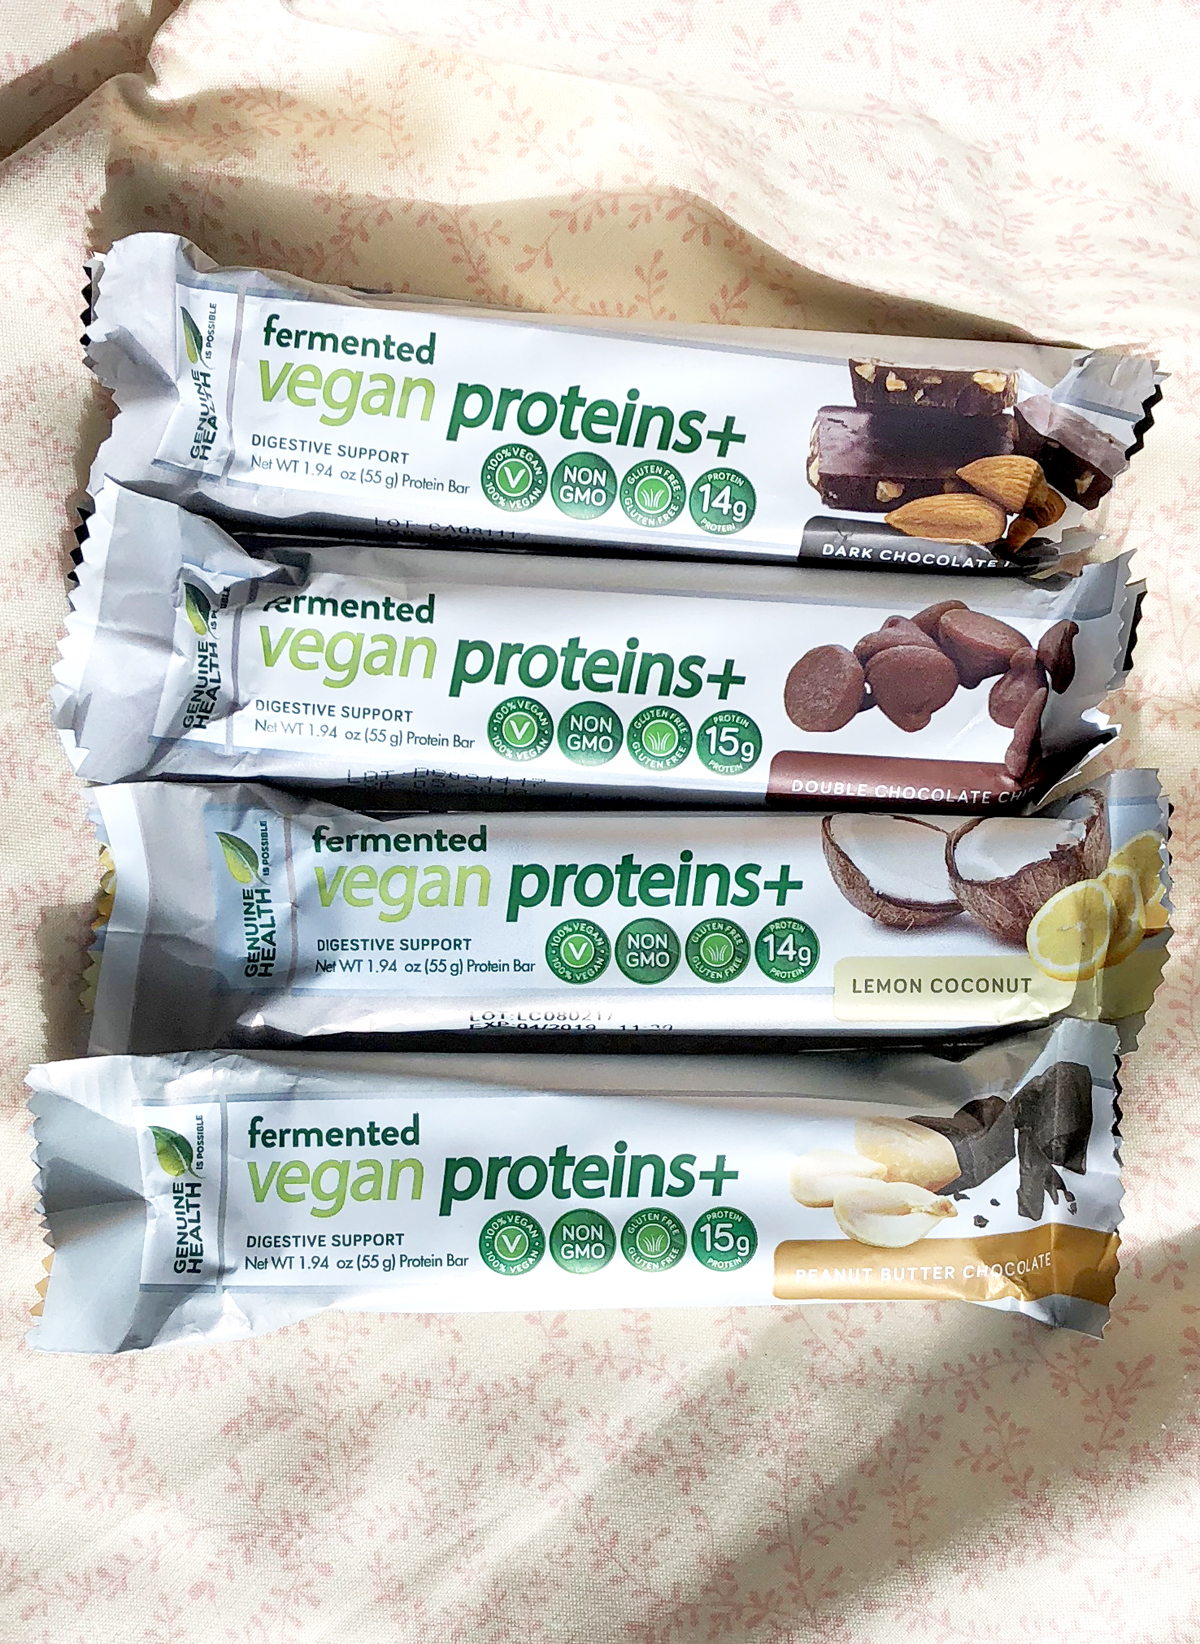 Great for gut health and immune support, these bars offer the most complete absorption of protein and nutrients available.